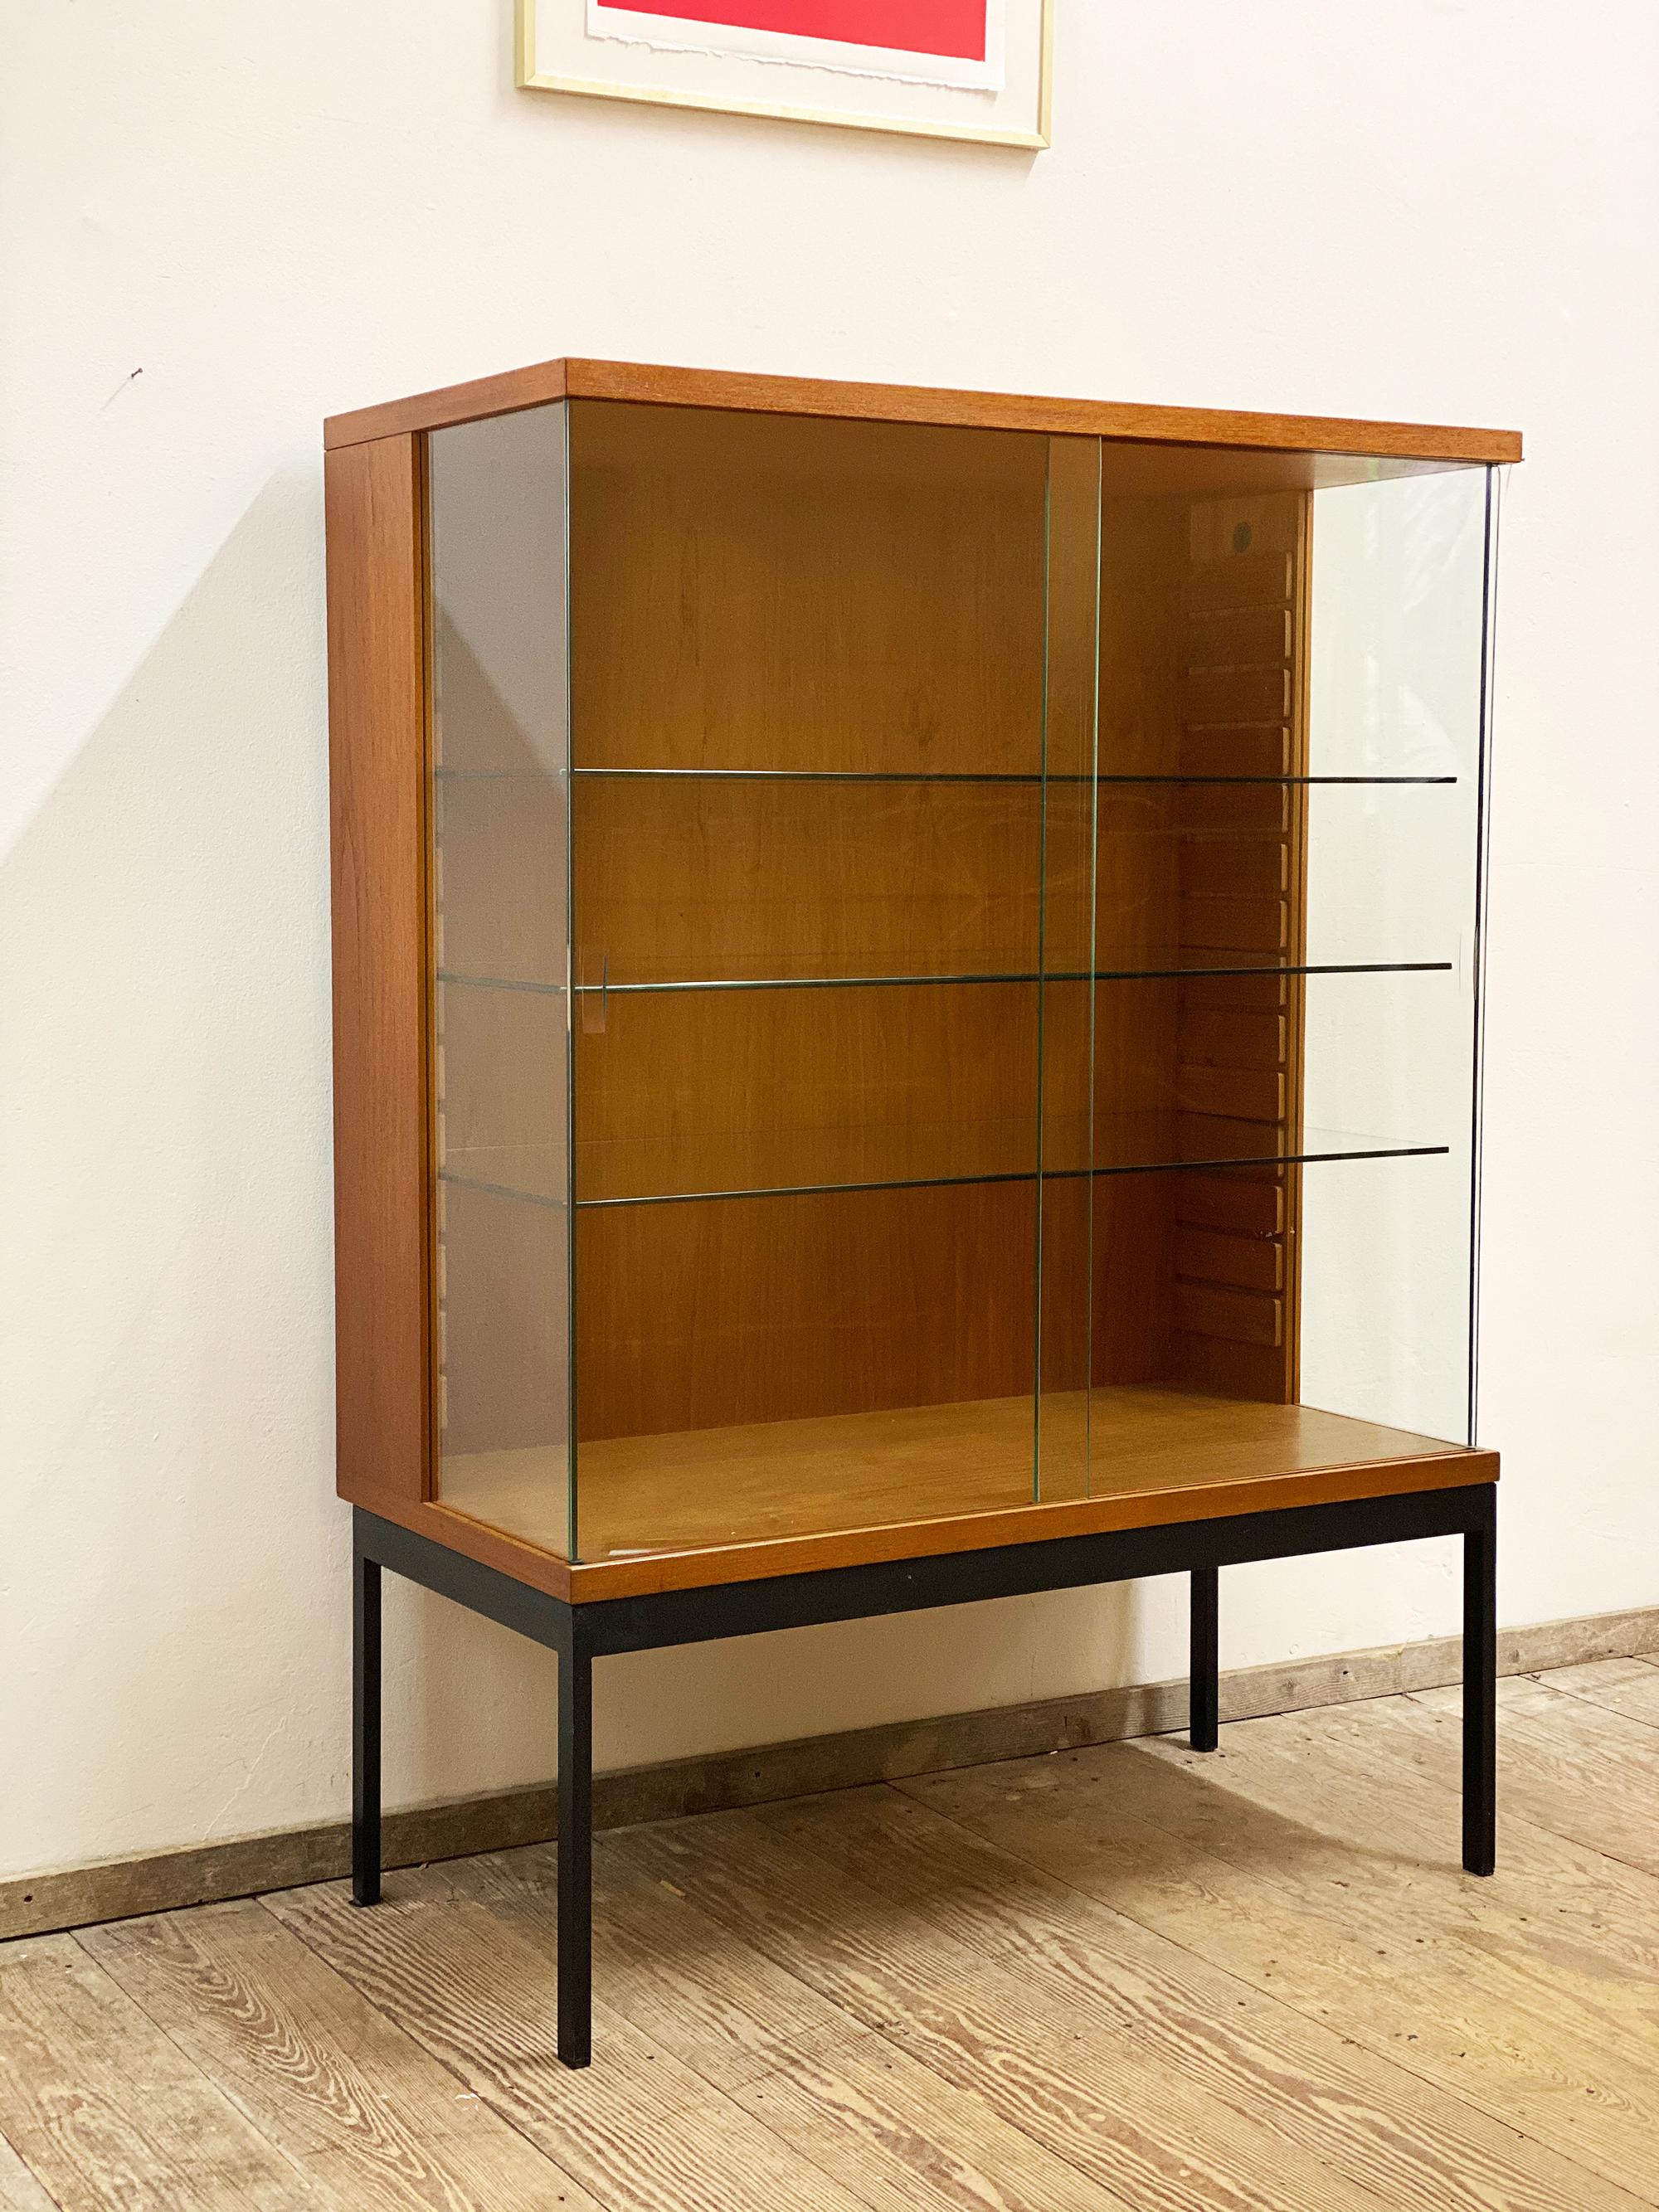 Dimensions 86 x 43 x 119 cm (W x D x H)

Elegant Dieter Wäckerlin glass cabinet in teak veneer with a nice grain. The minimalist sideboard sits on a black metal base and has glass corners in the front. This is a rare showcase from Waeckerlins